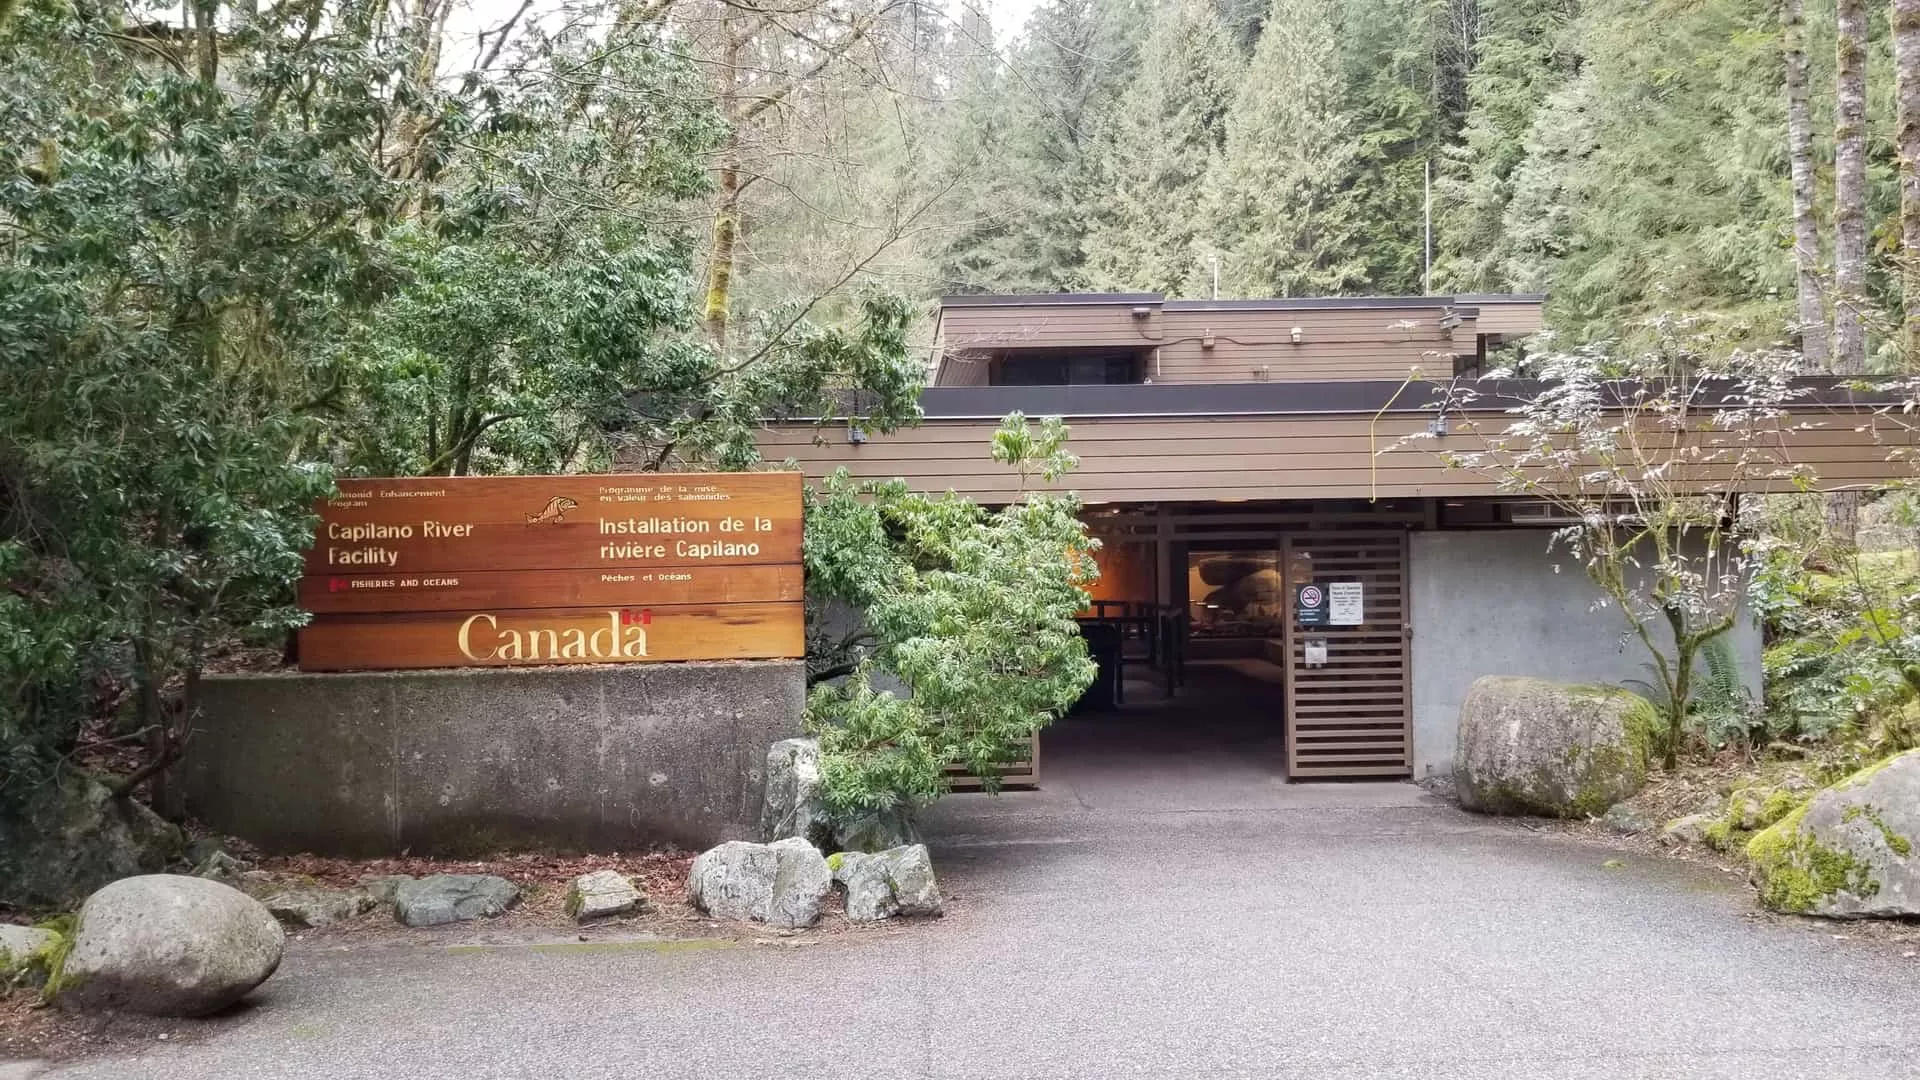 Capilano River Hatchery in Canada, North America | Fishing - Rated 4.6